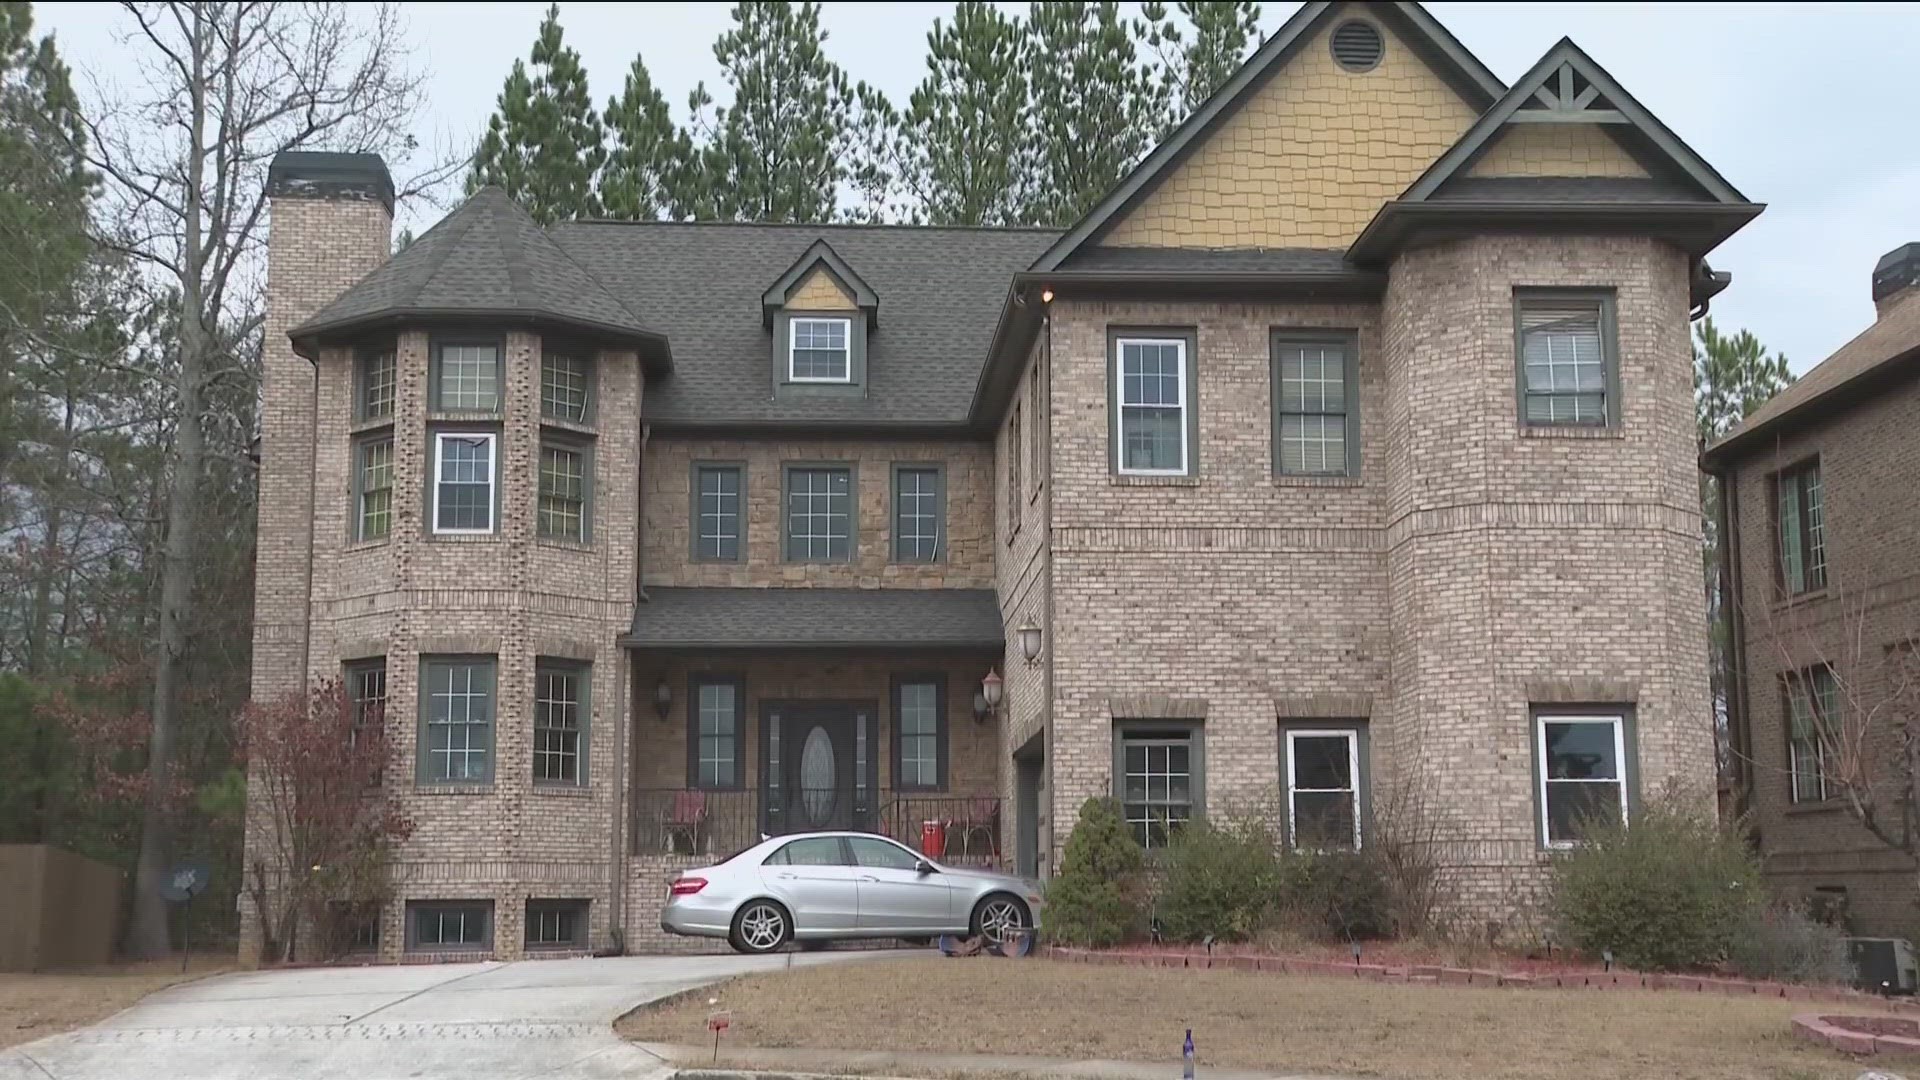 Gwinnett County Police homicide detectives are investigating the incident that occurred at a home on Chance Lane.